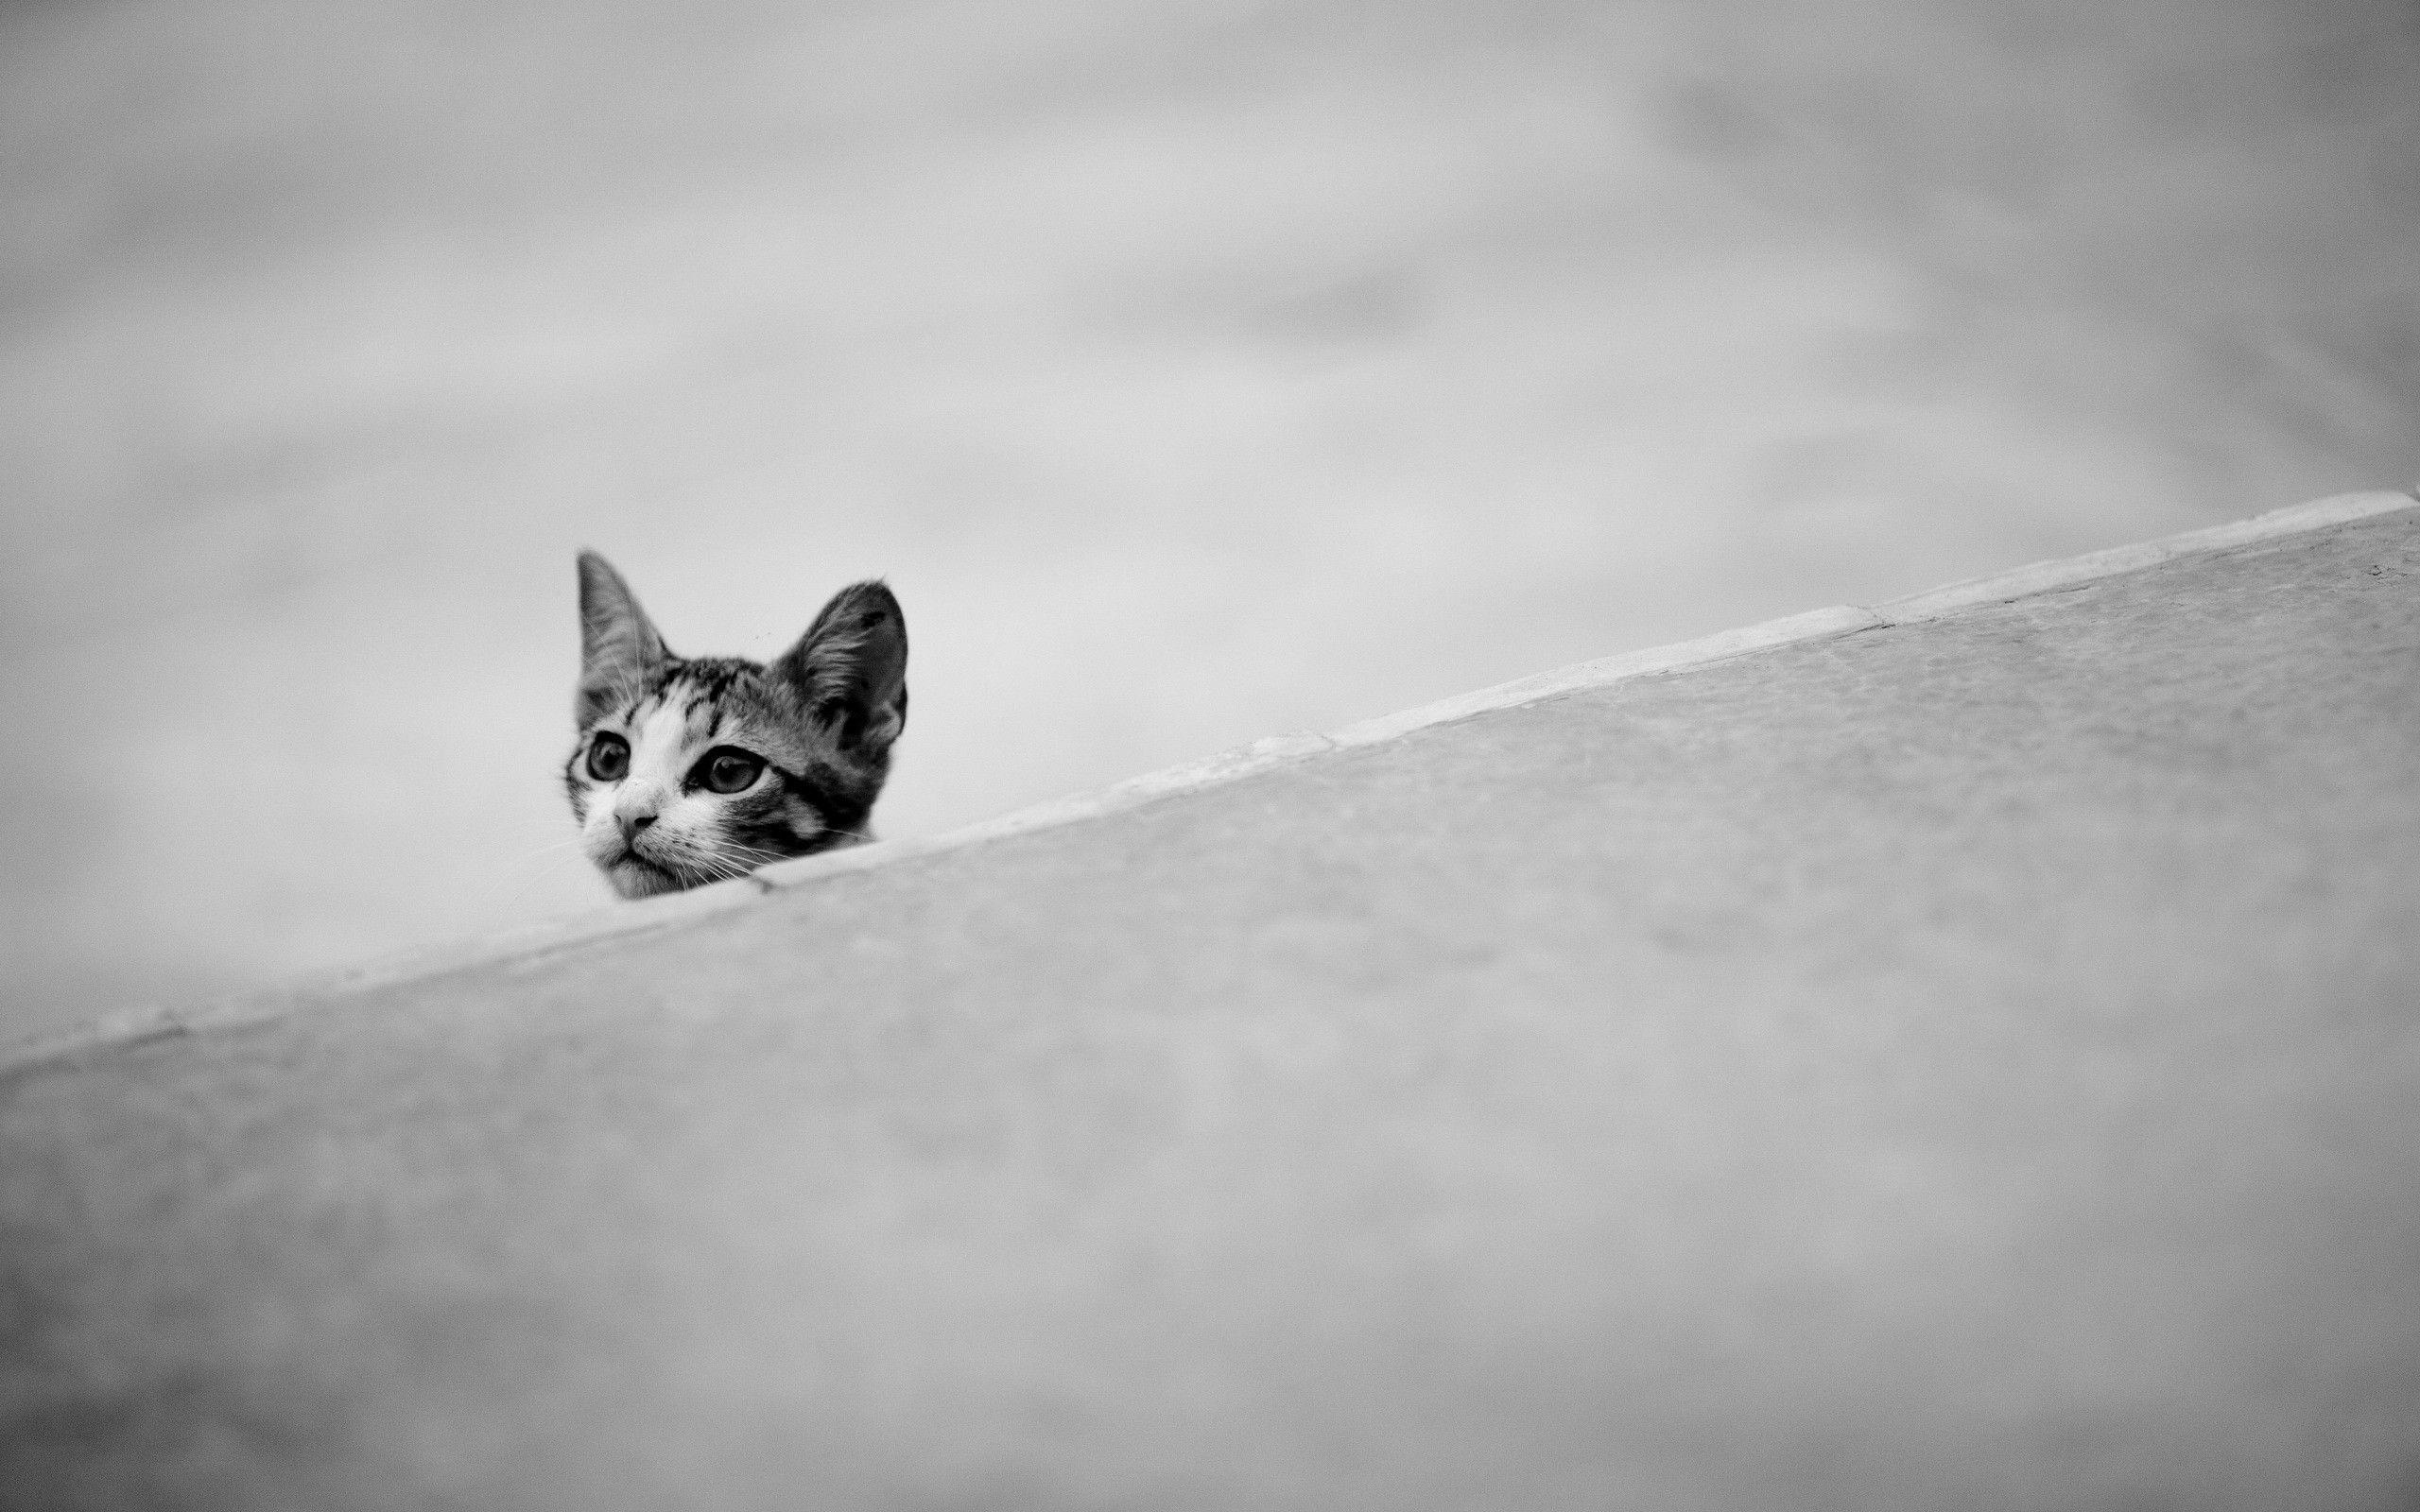 black and white. Black and white cat wallpaper Black and white cat